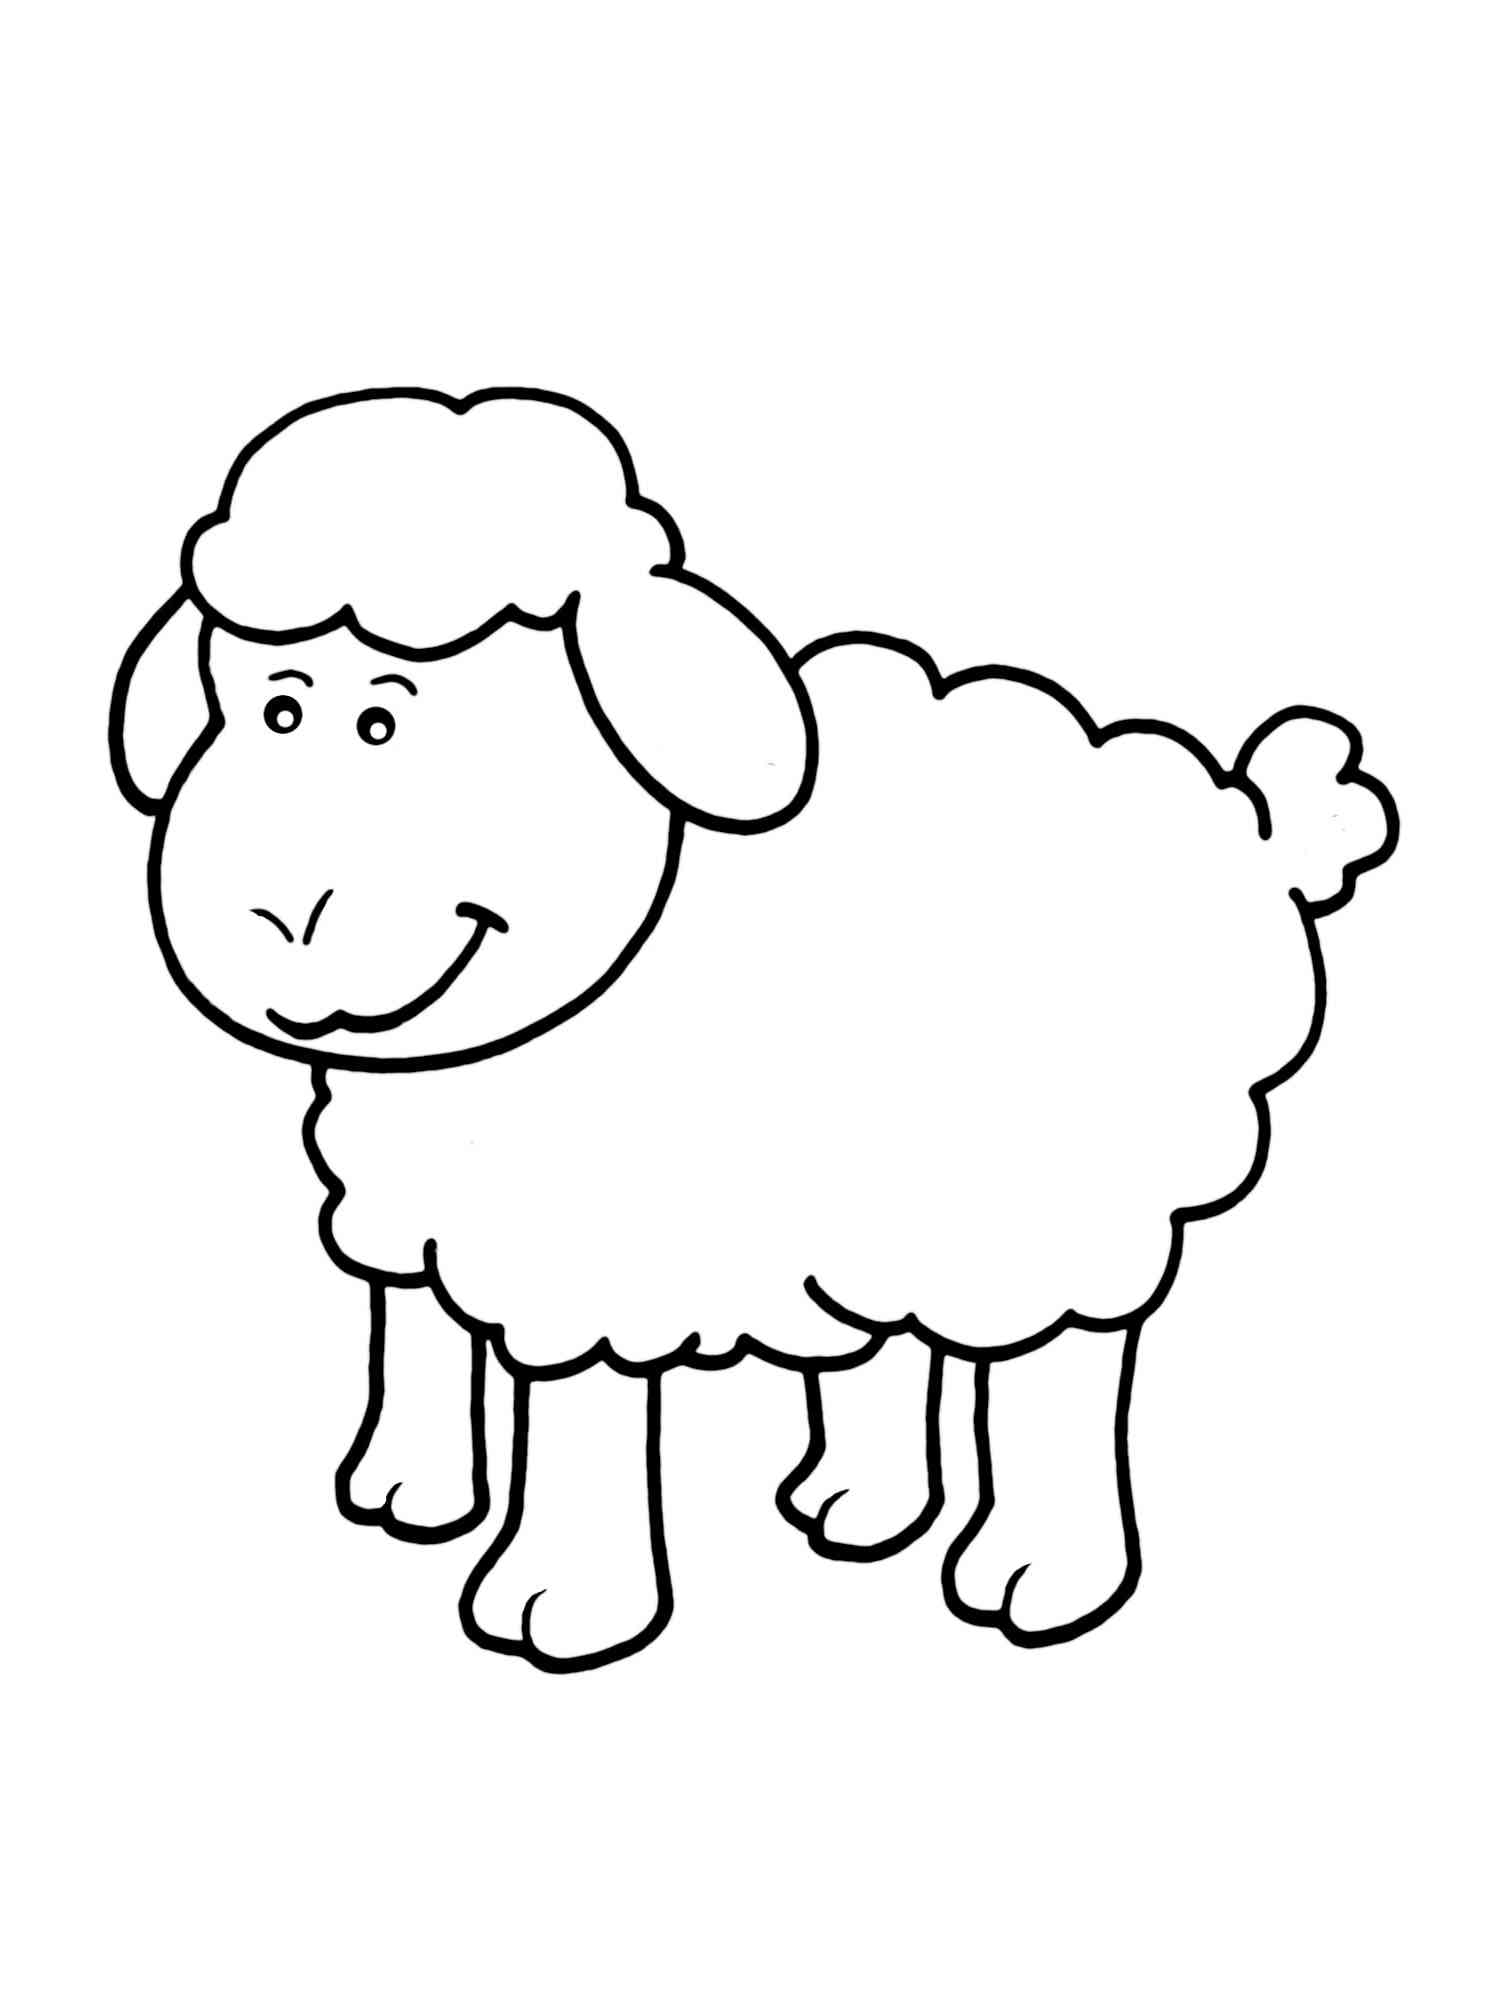 Sheep Smiling coloring page